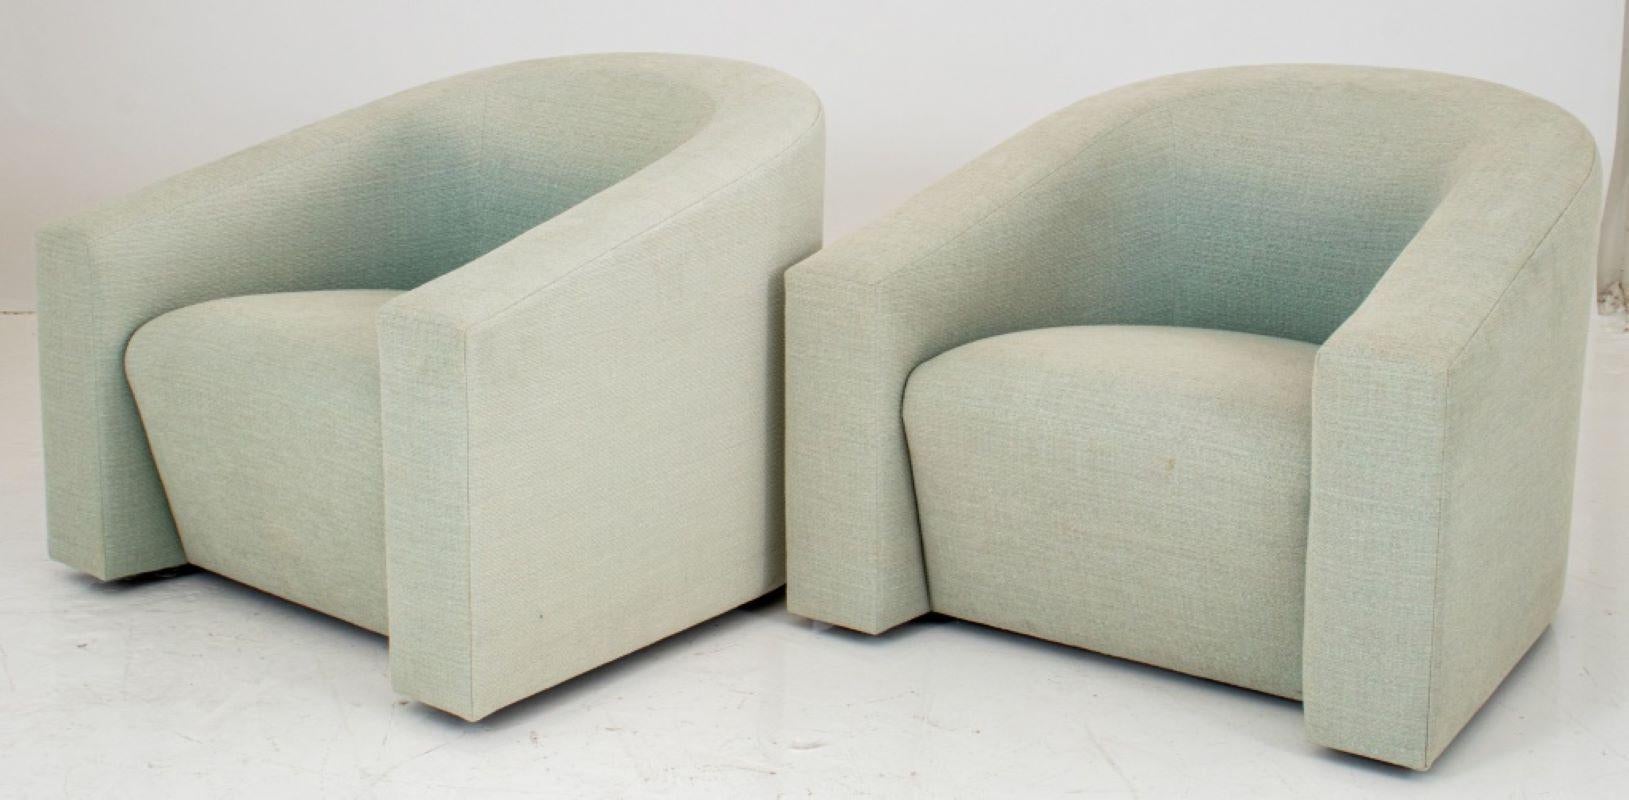 Donghia Italian Modern pair of lounge armchairs with cascading armrests on swivel bases, upholstered in a light celadon green, makers label on bottom. 29